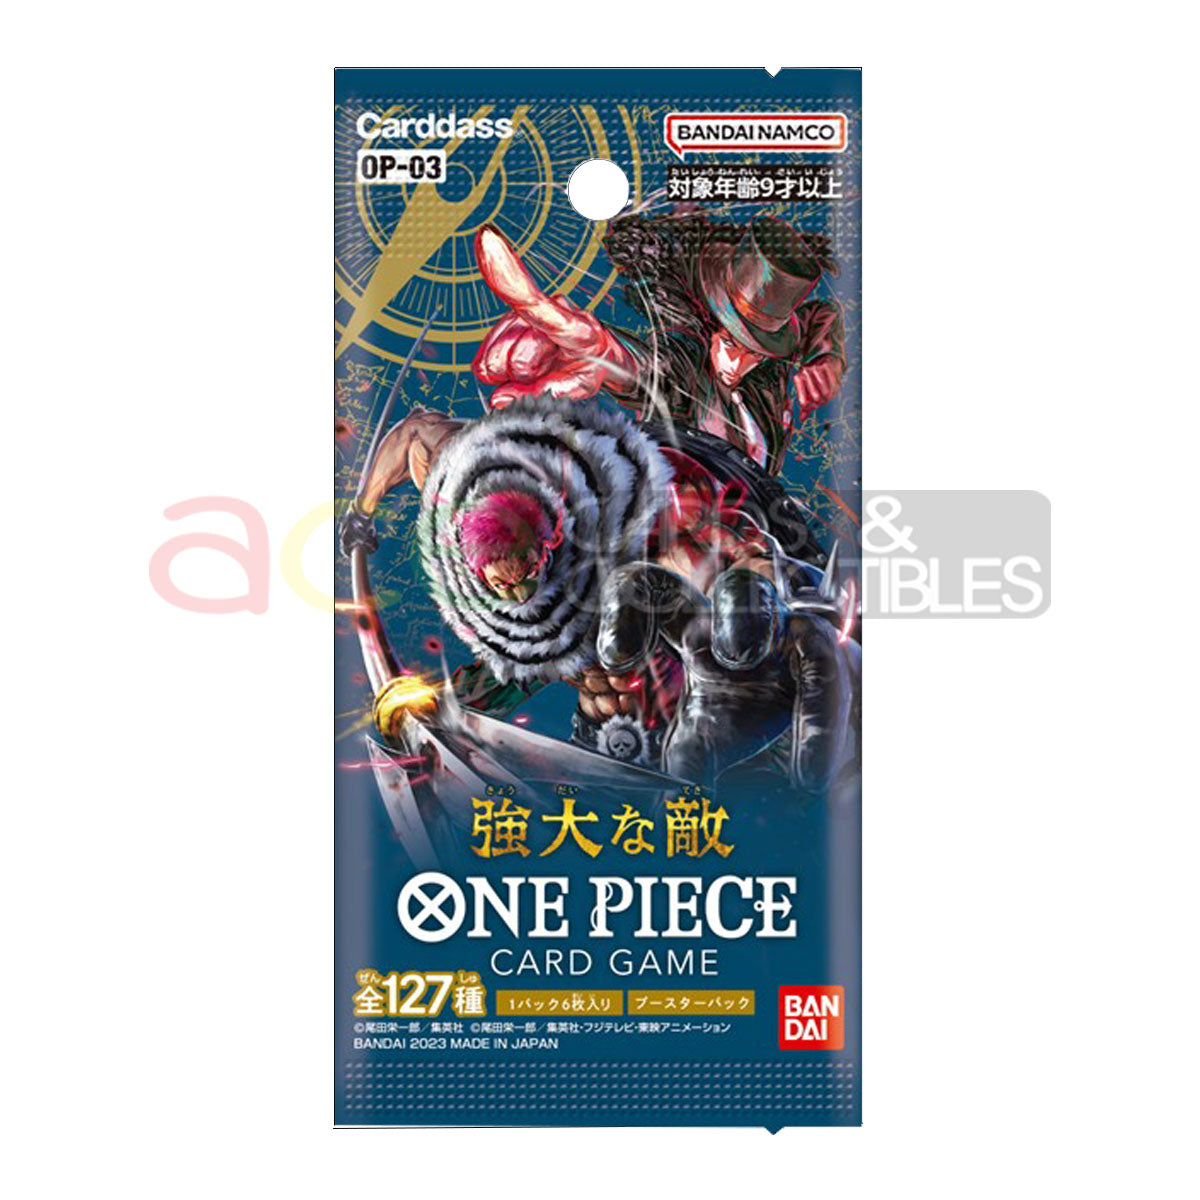 One Piece Card Game Mighty Enemies Carton [OP-03] (Japanese)-Bandai-Ace Cards & Collectibles